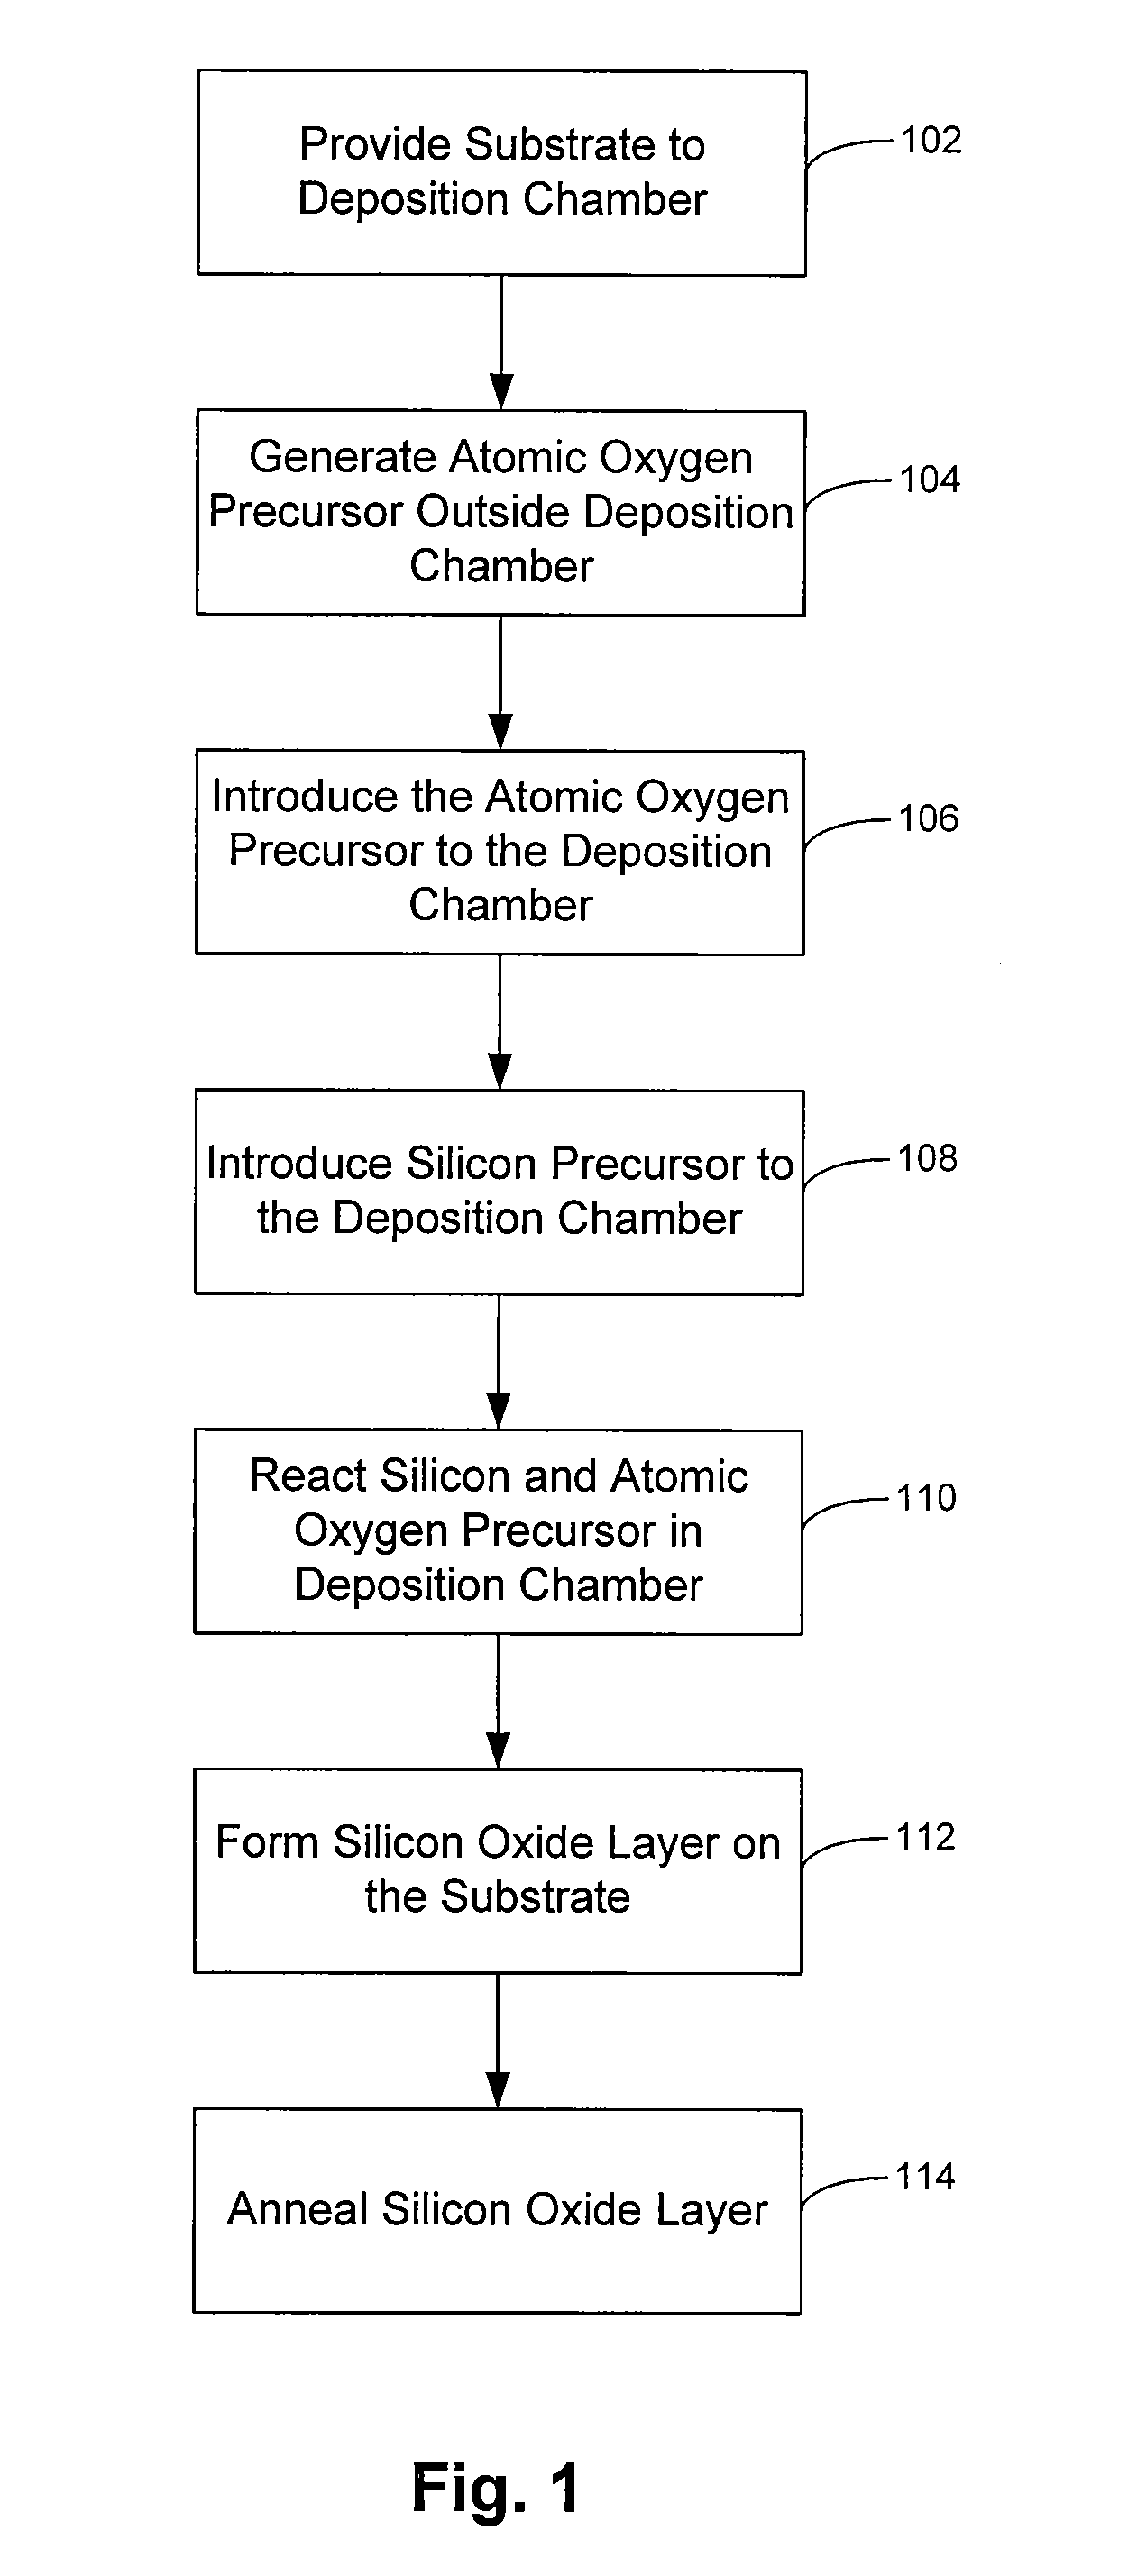 Chemical vapor deposition of high quality flow-like silicon dioxide using a silicon containing precursor and atomic oxygen